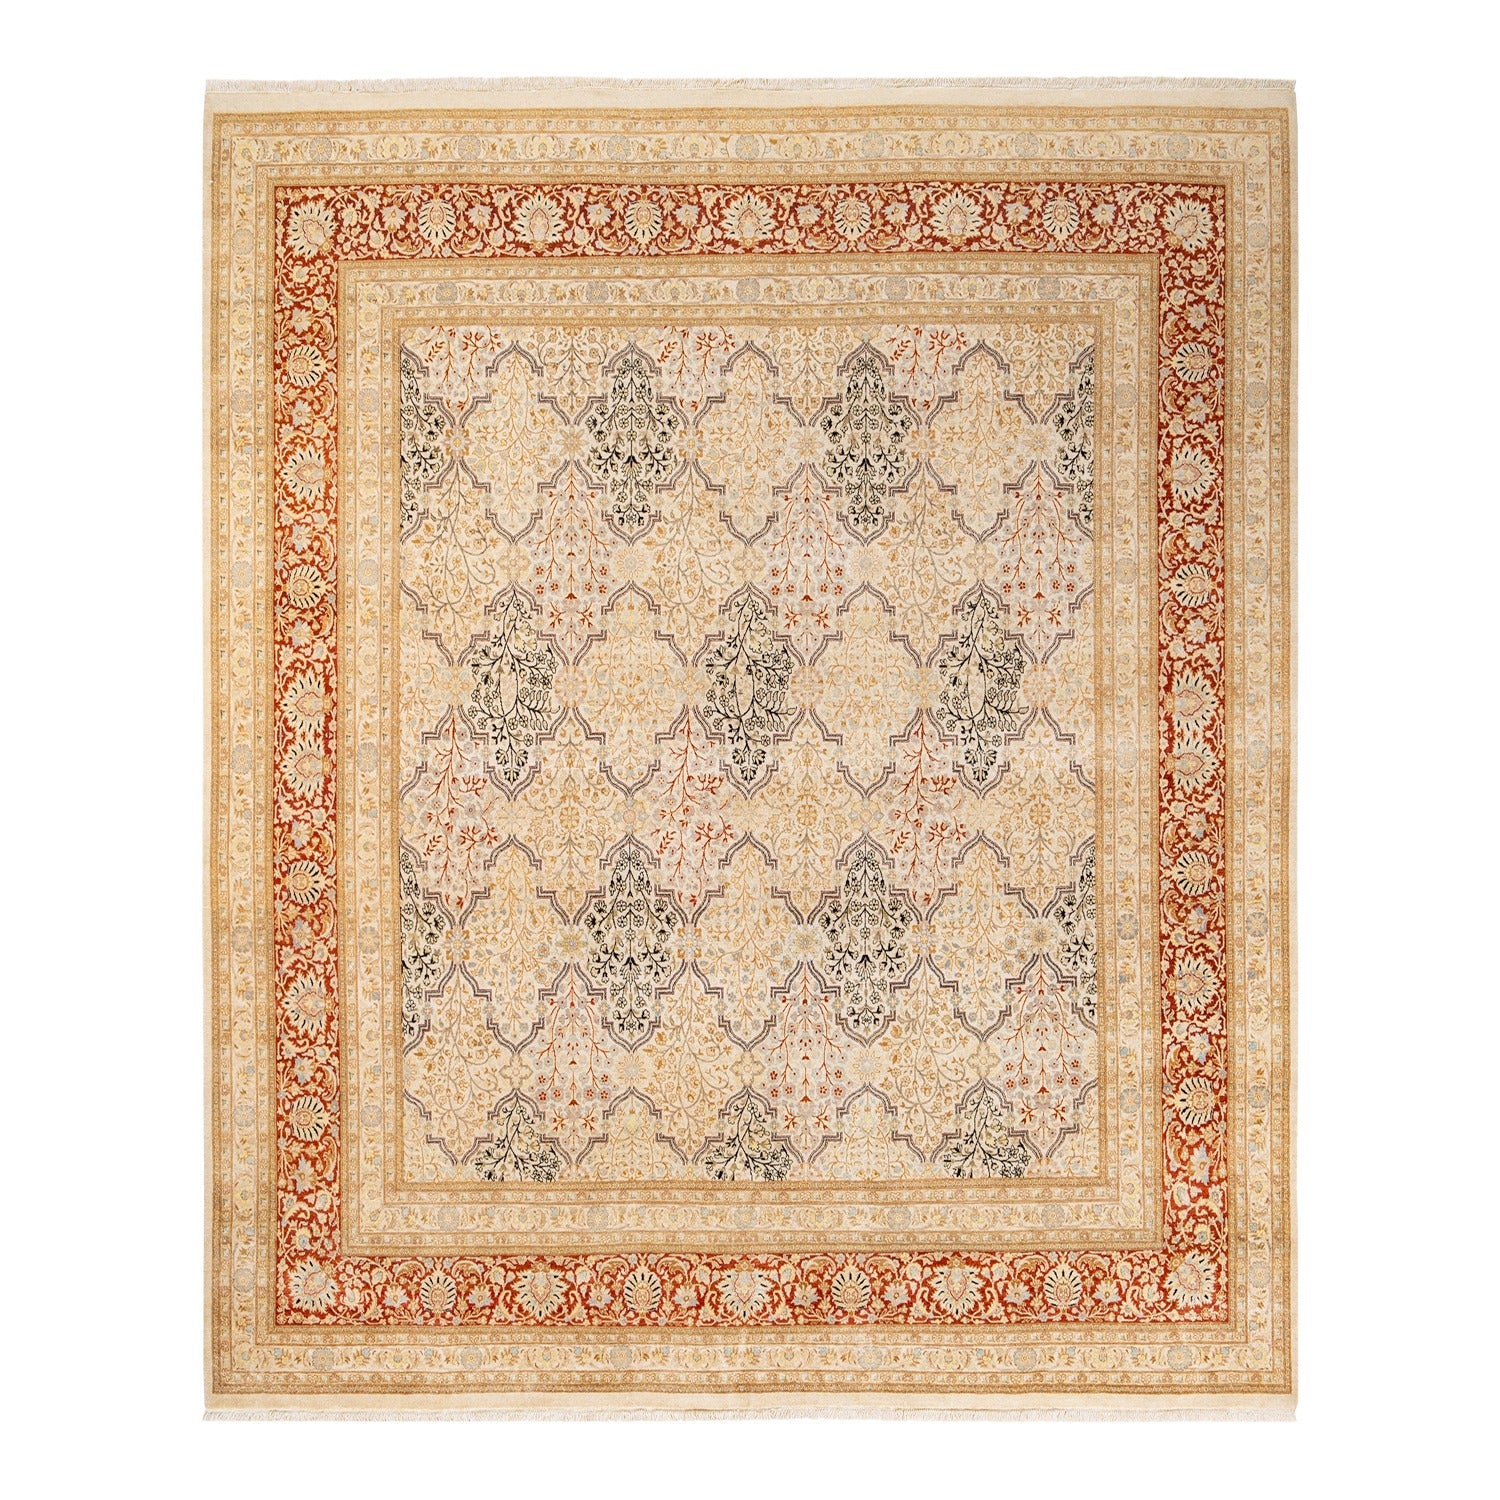 Intricate floral and geometric patterned rug with sophisticated color scheme.